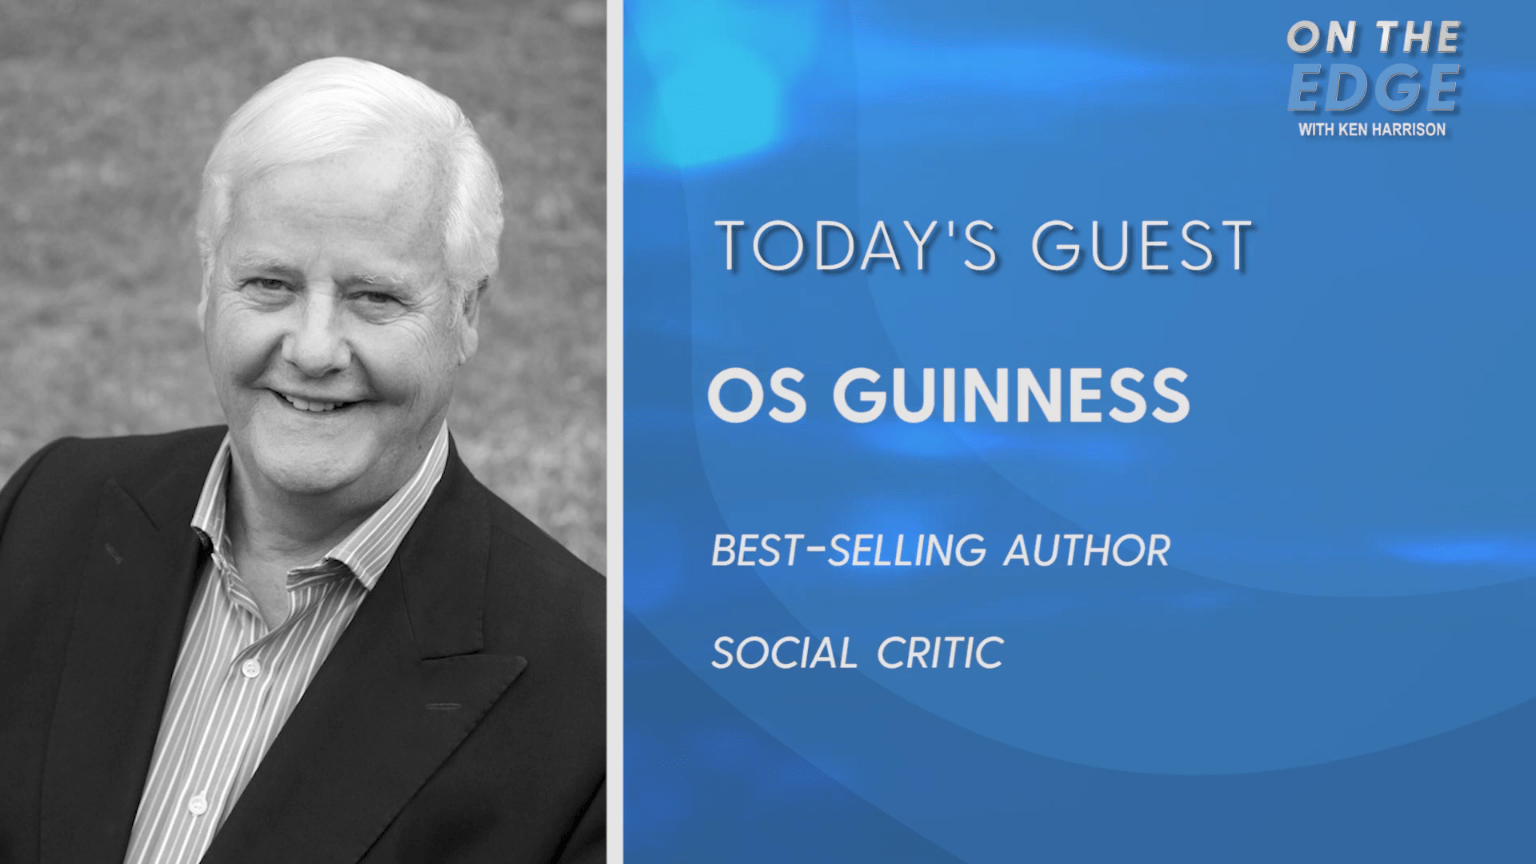 Os Guinness discuss his childhood, Church and state, and the need for American Christians to remain steadfast in ever-growing secular society